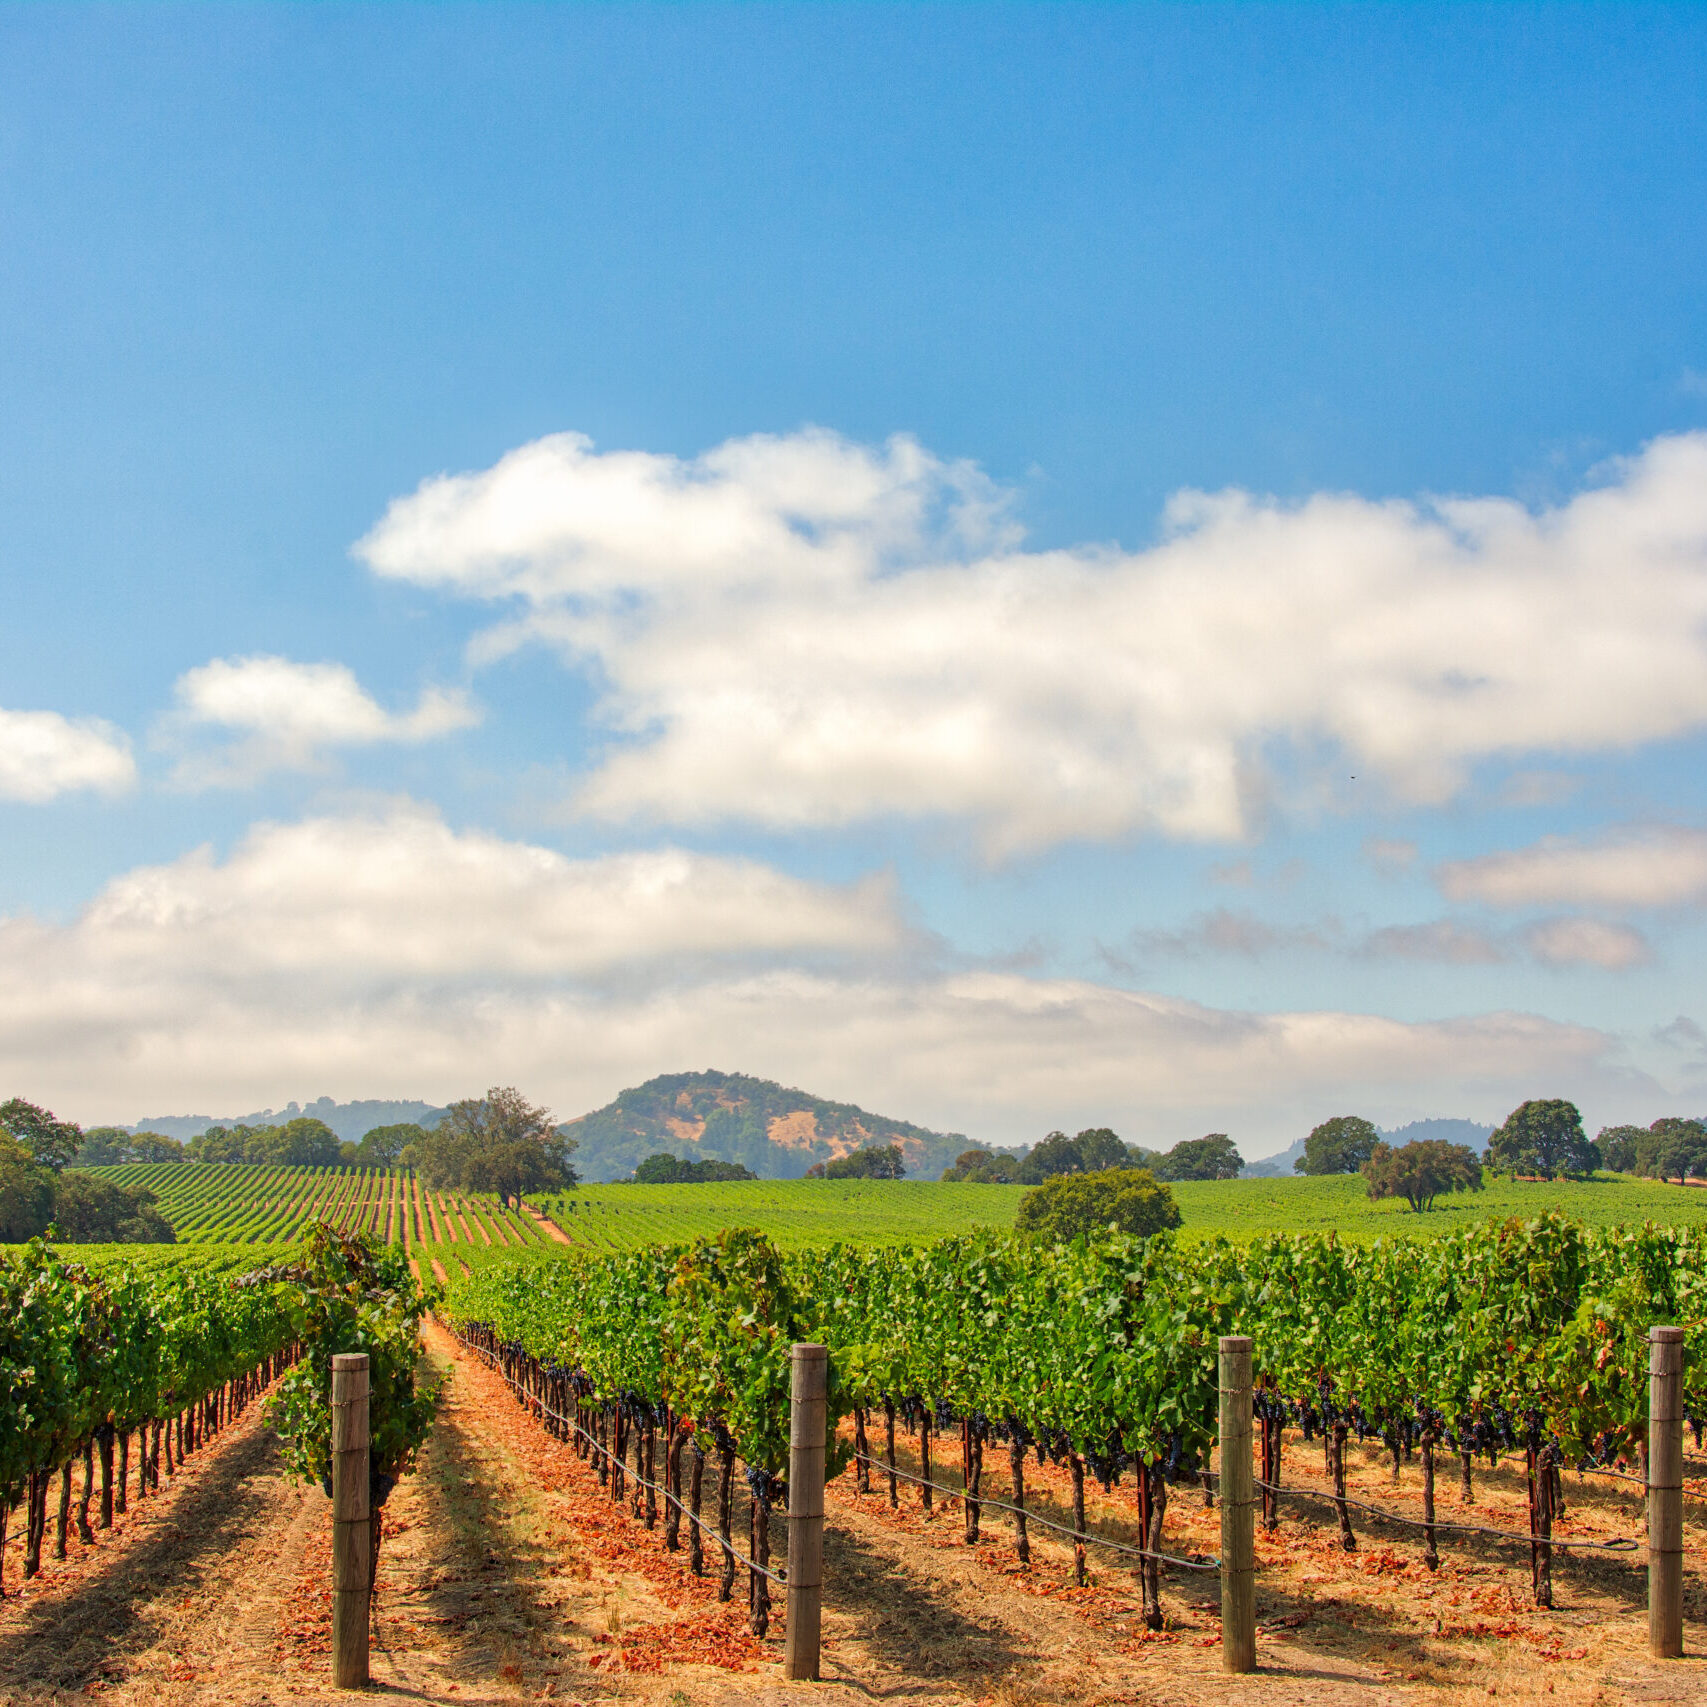 Vineyard With Oak Trees And Clouds., Sonoma County, California, USA